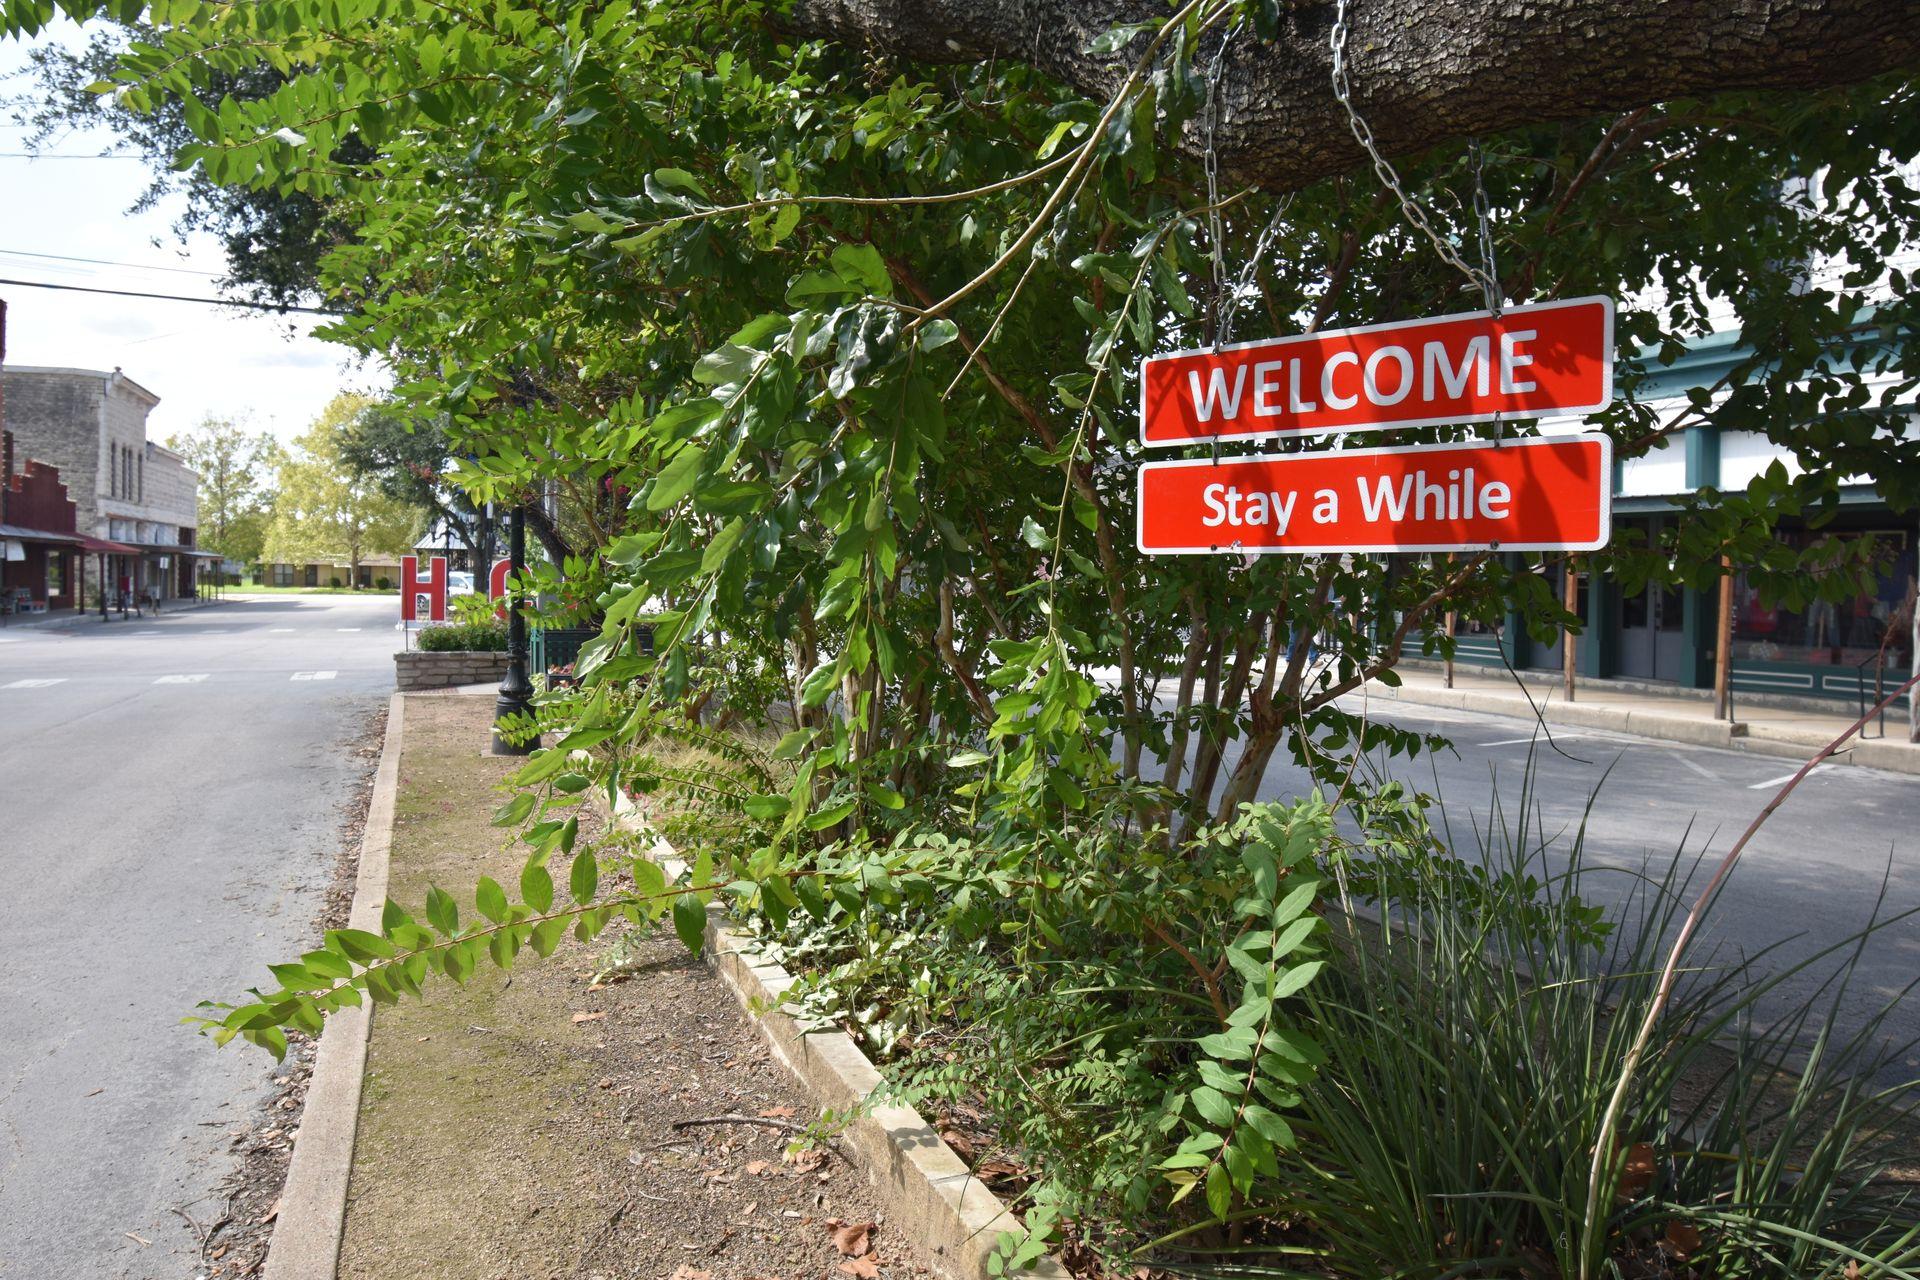 A red sign that reads "Welcome, Stay a While" among greenery in the middle of a road in downtown Hico.